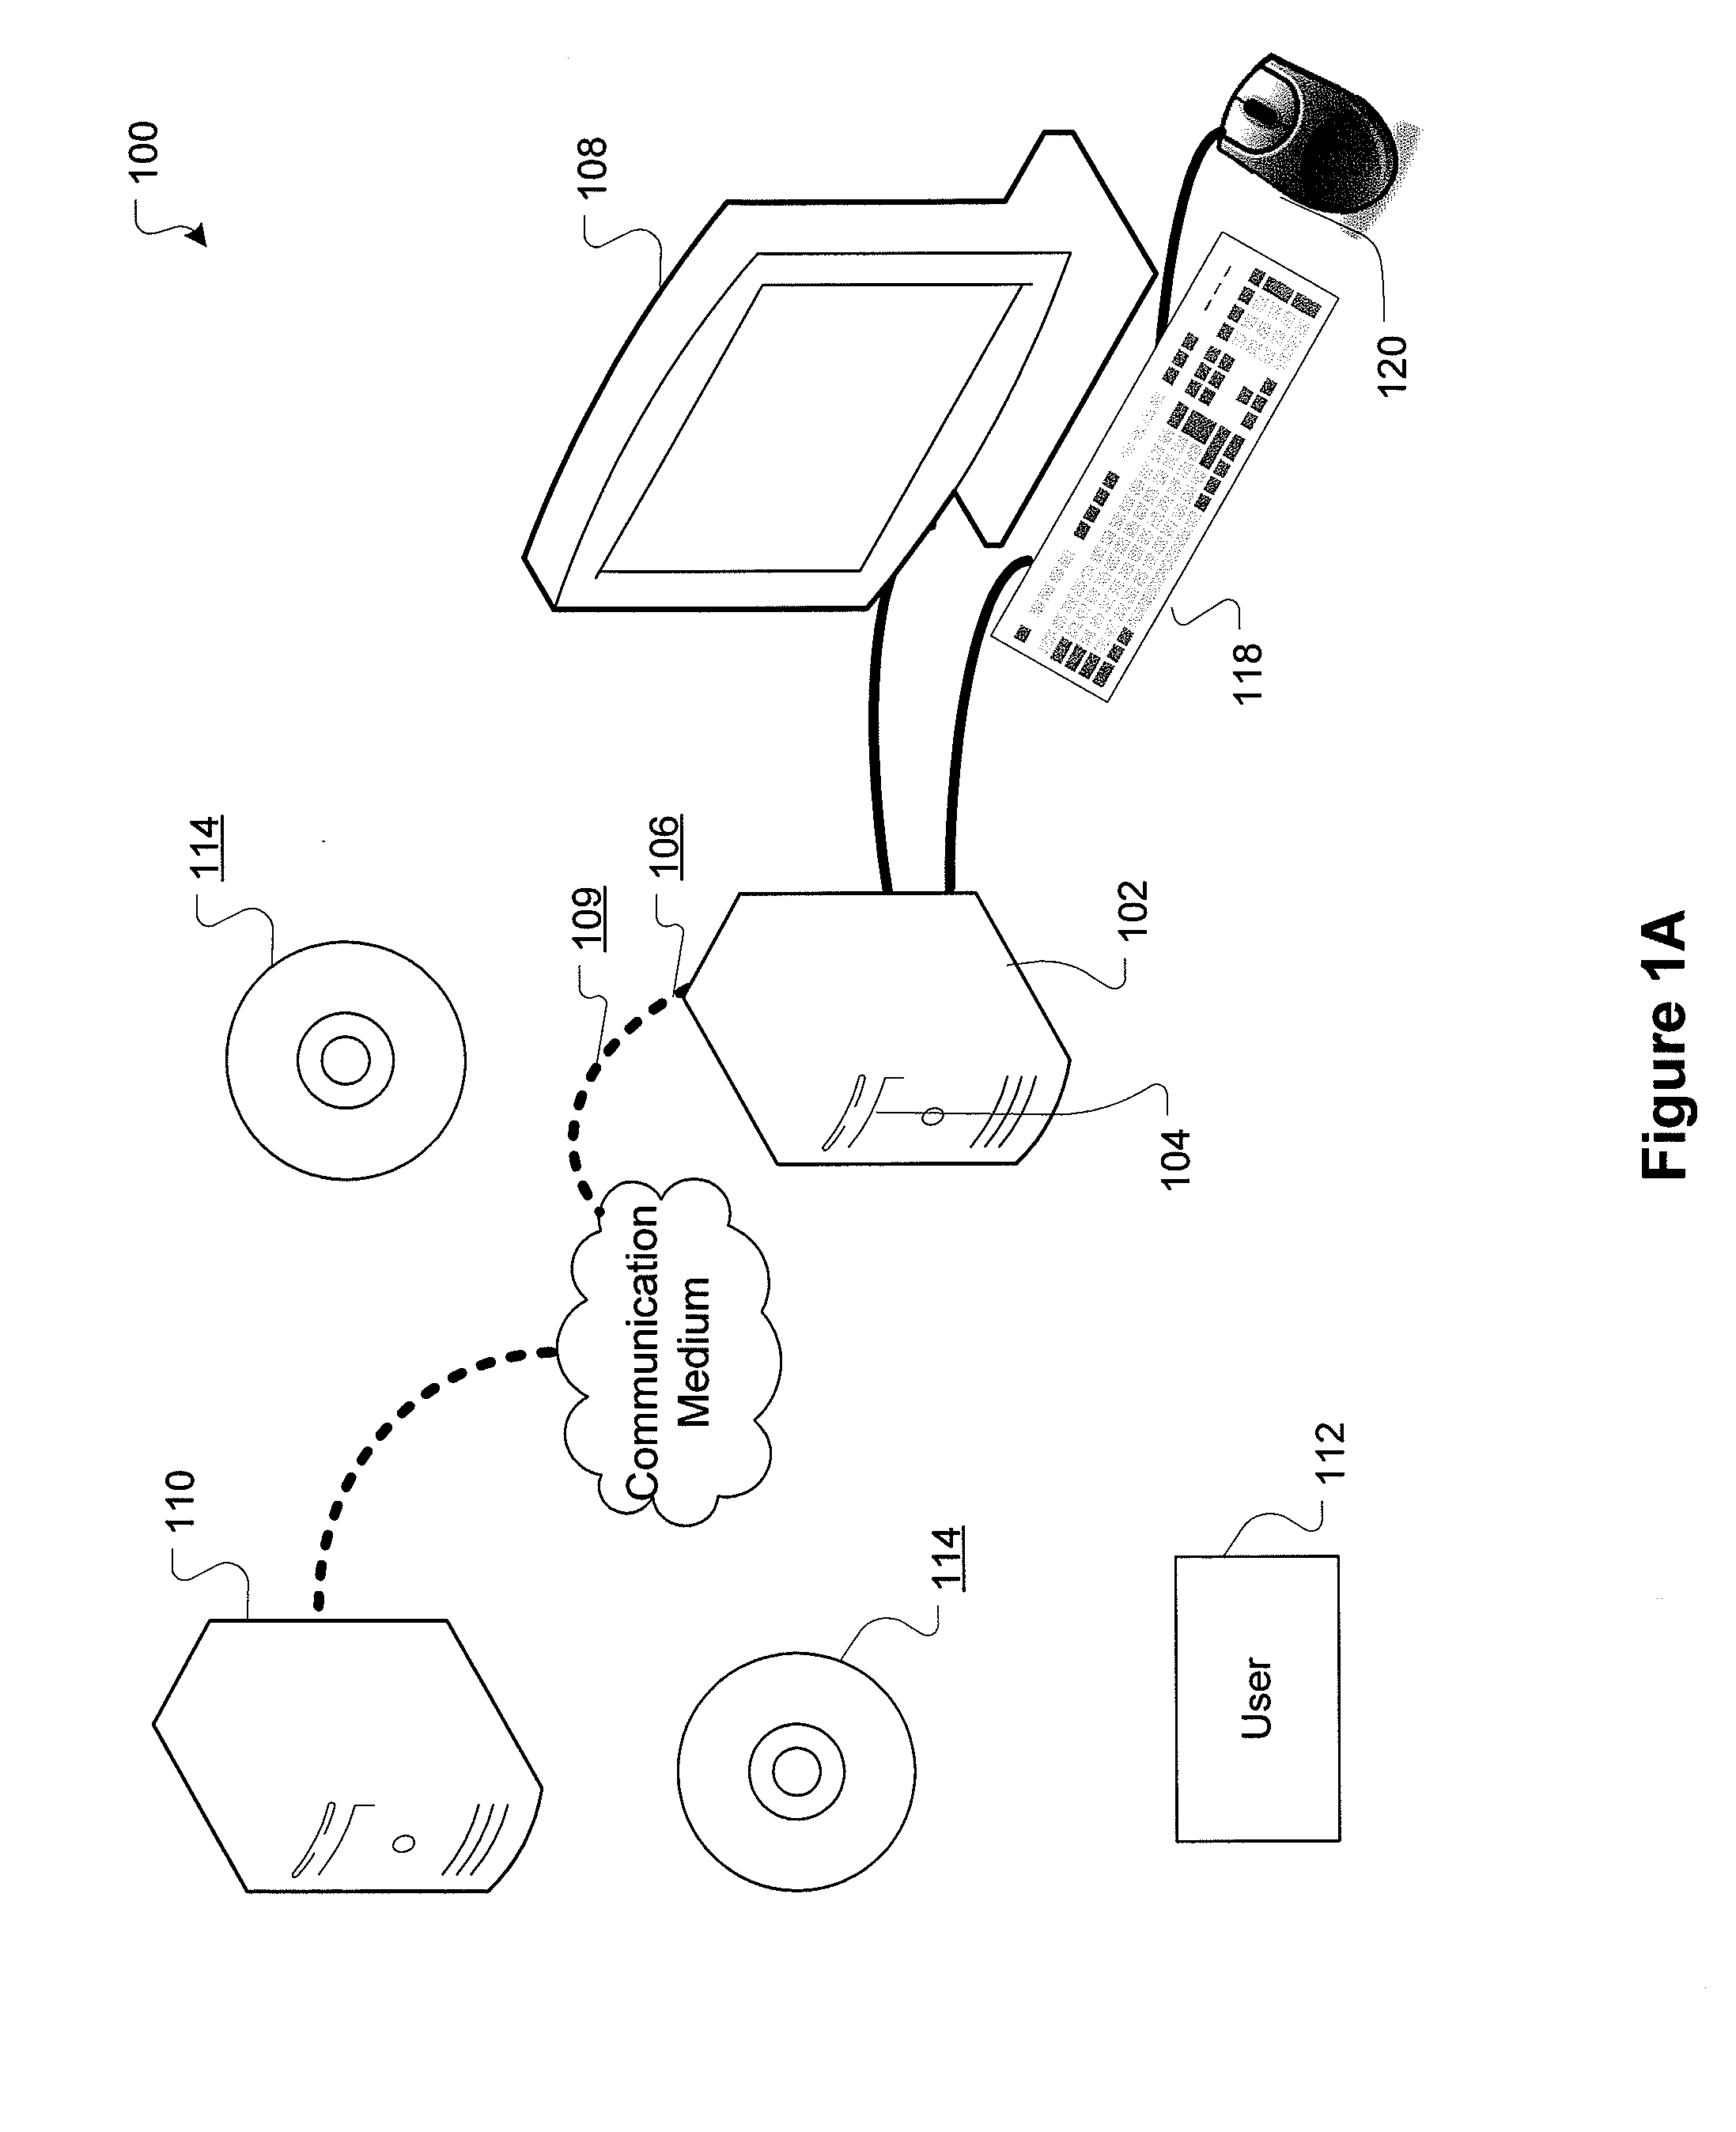 Systems and methods for managing patient research data